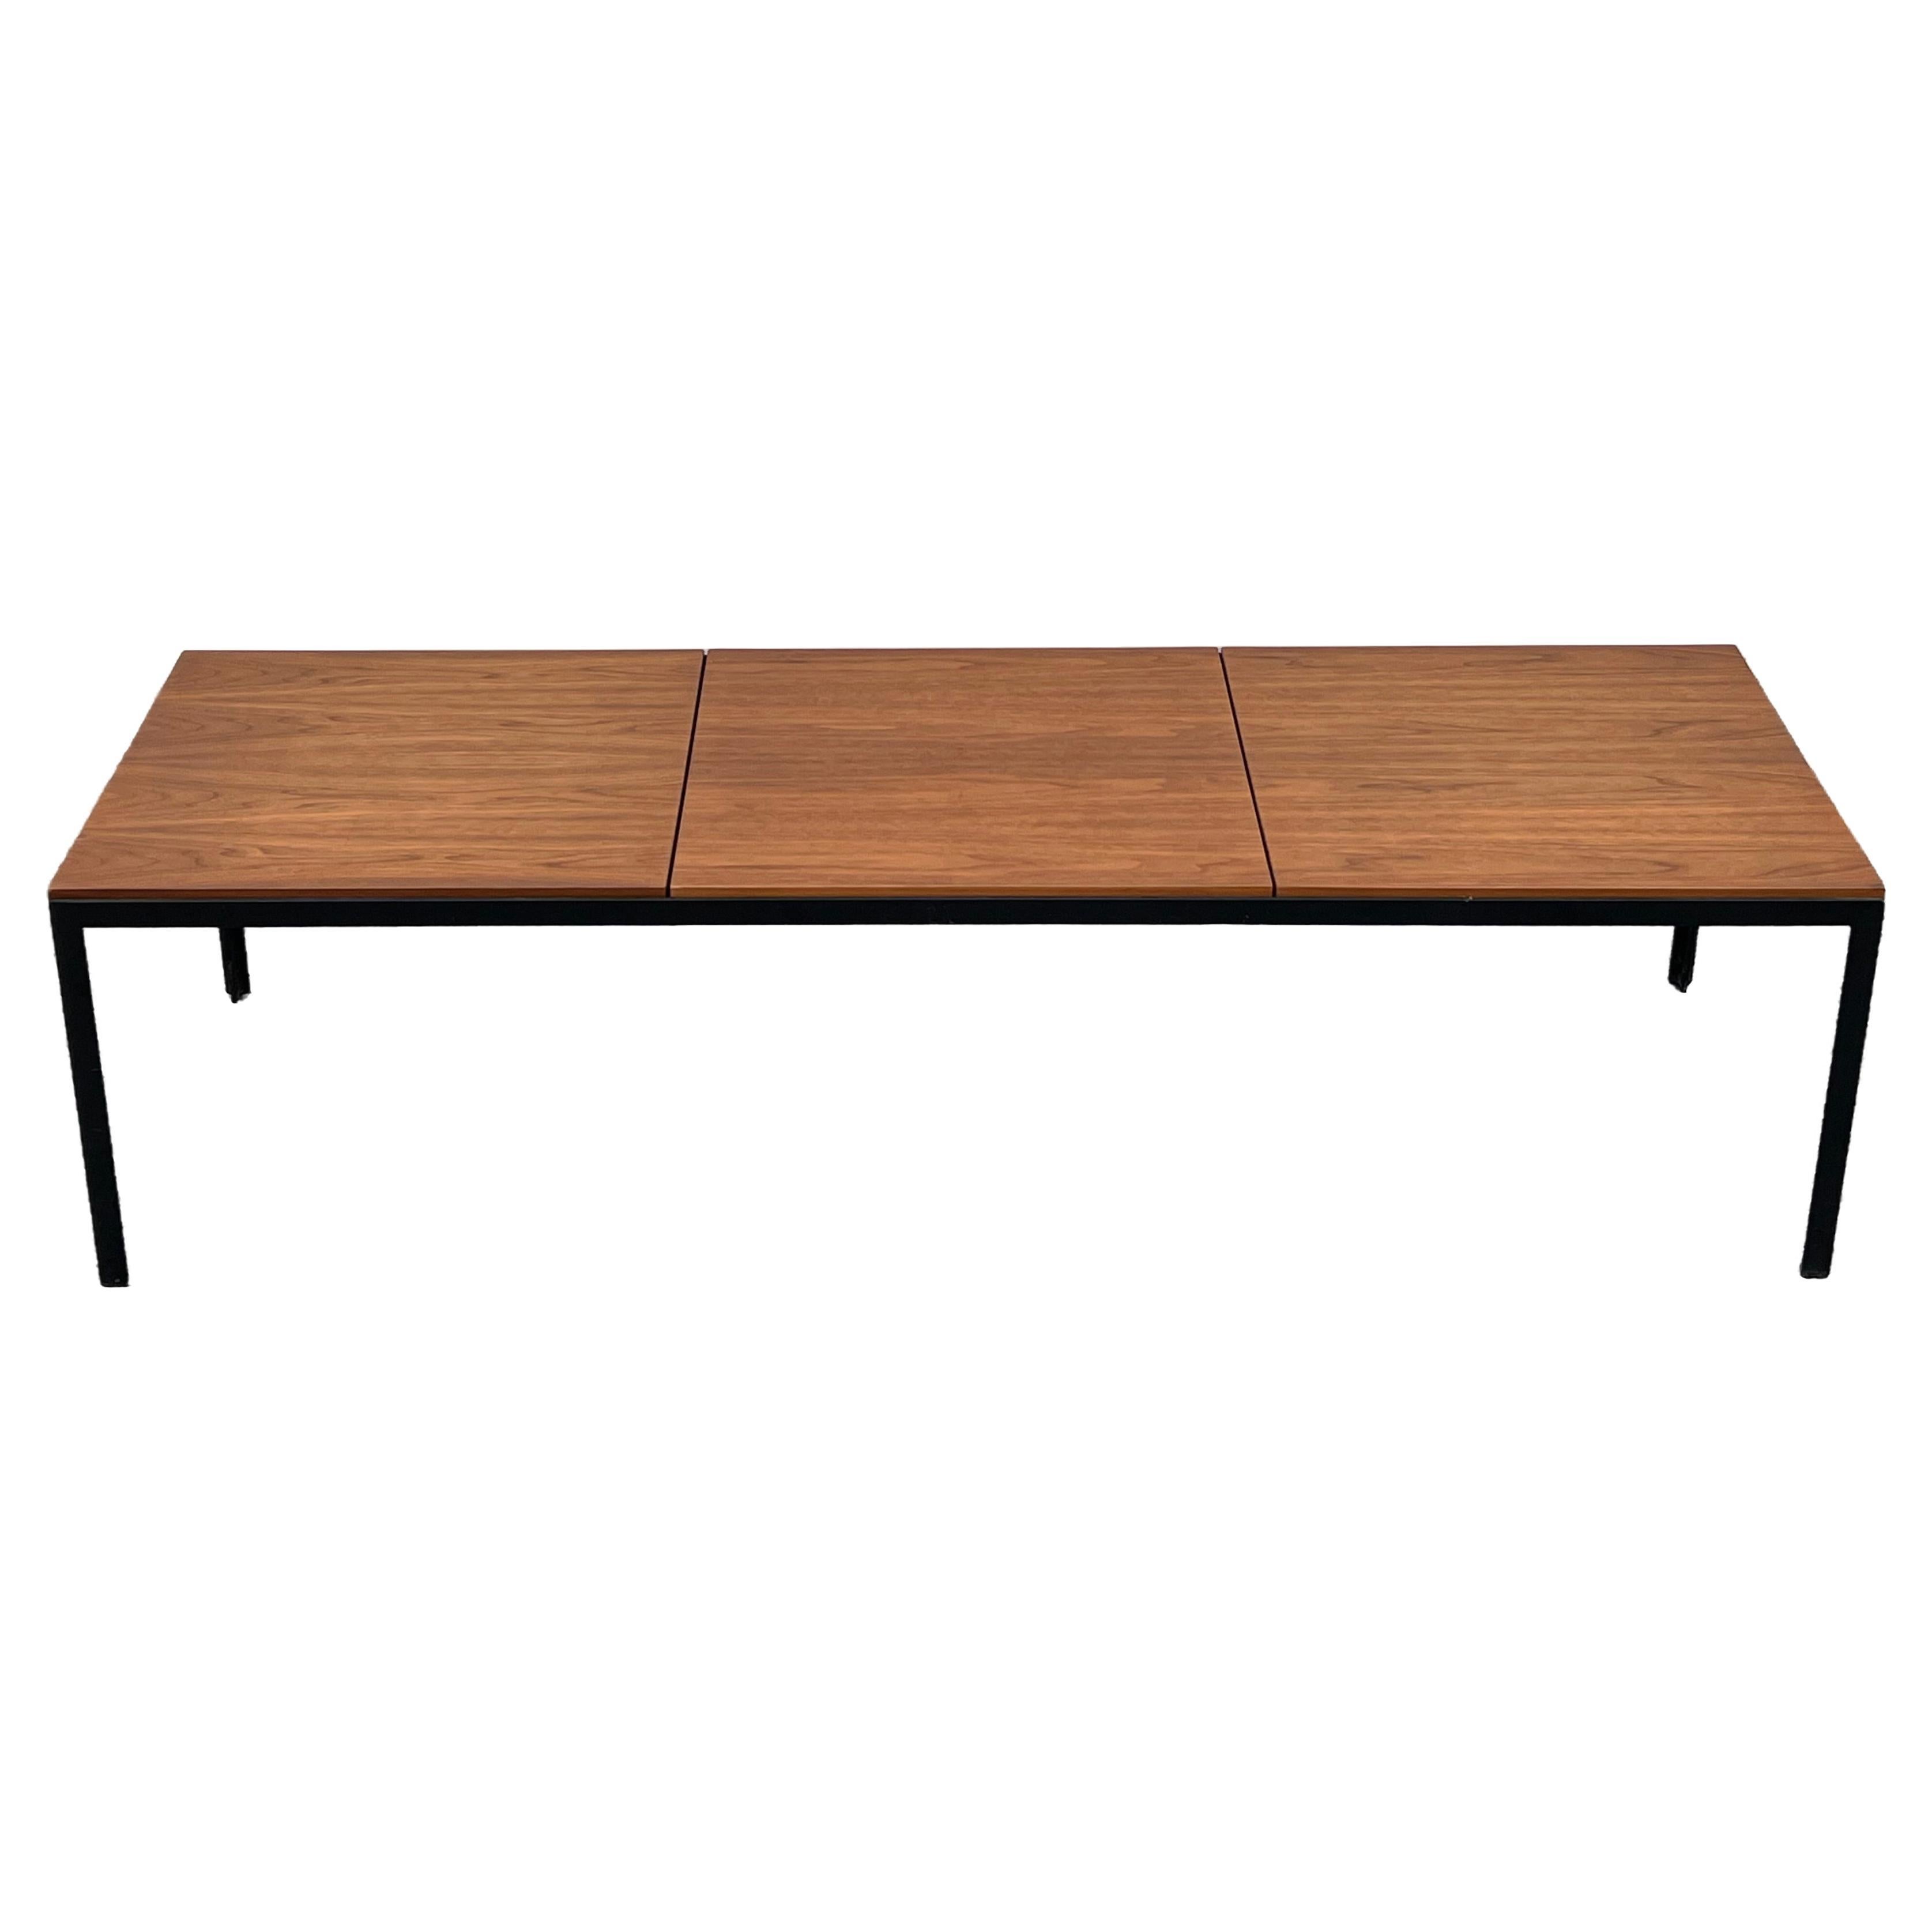 A Classic Knoll Coffee Table Or Bench With Angle Iron Frame Ca' 1960's For Sale